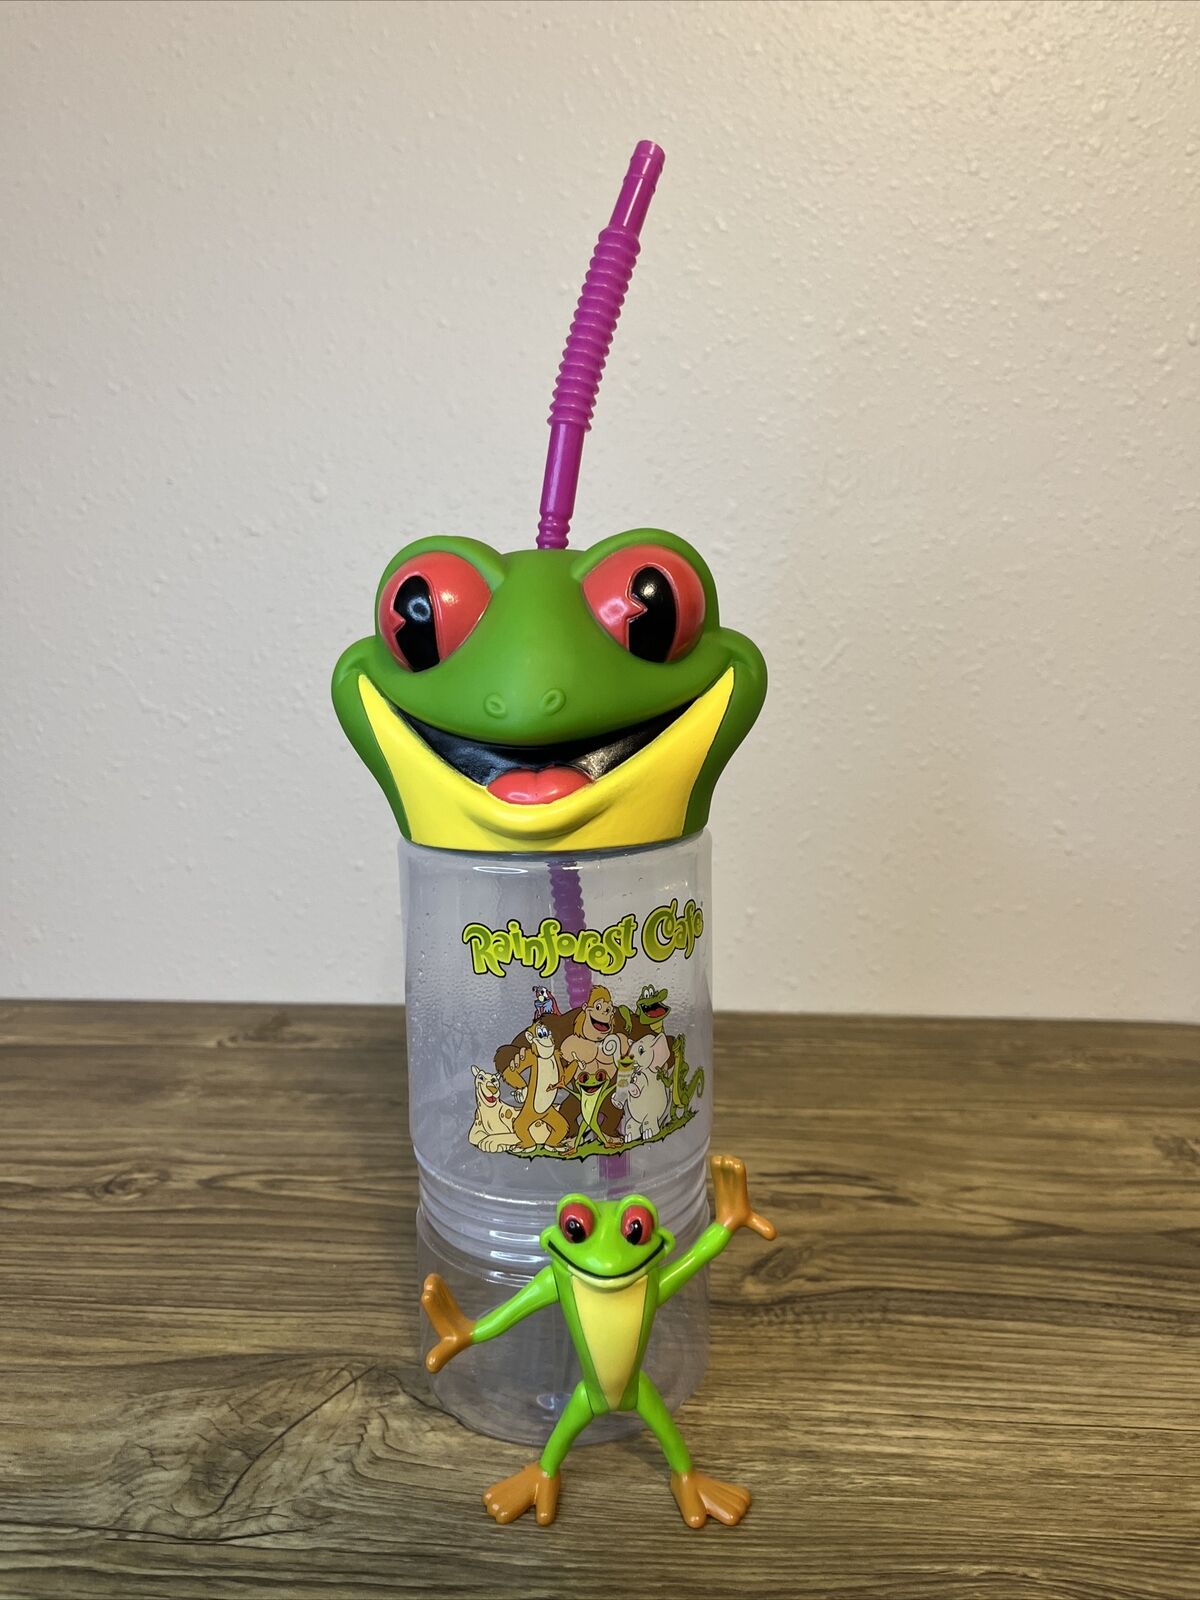 Rainforest Cafe Tree Frog 3D Head Water Bottle Souvenir Drink & Snack With Frog